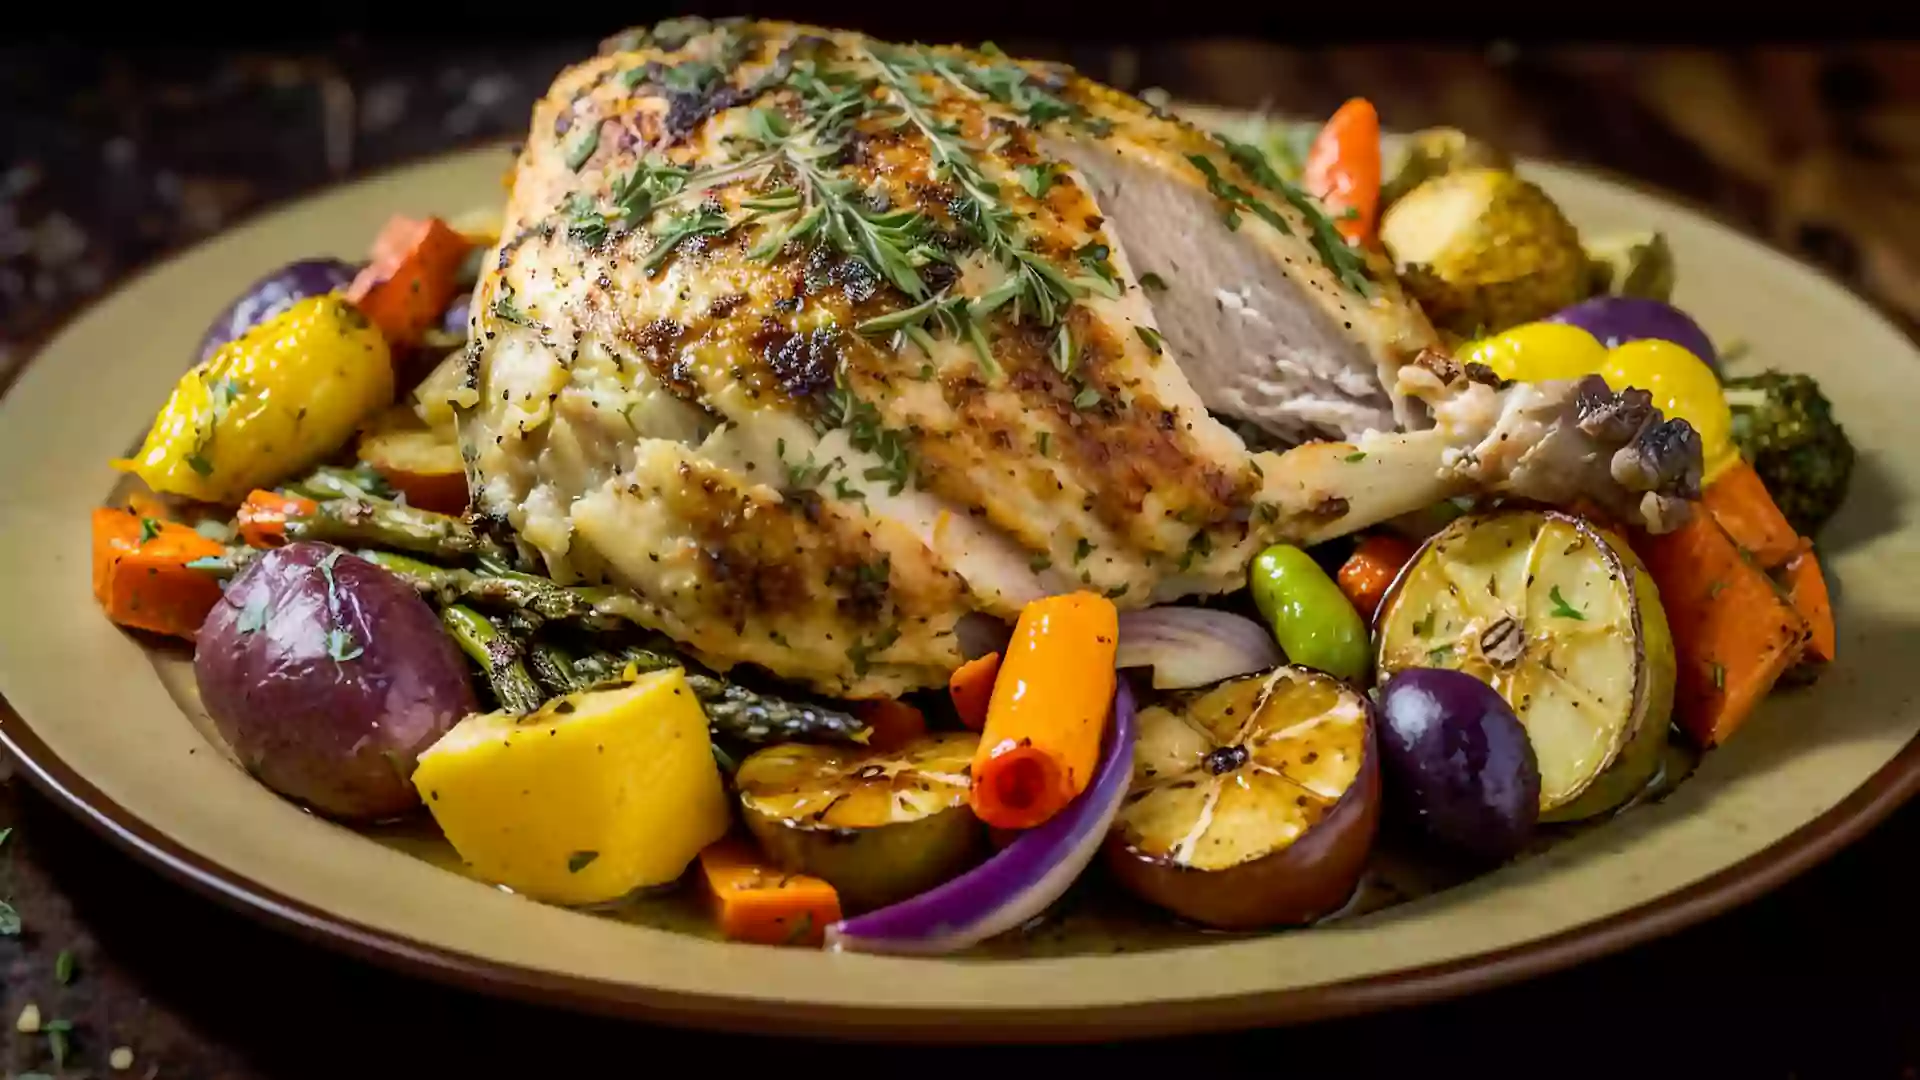 A Classic Thanksgiving Delight: Roasted Turkey with Herbs and Citrus